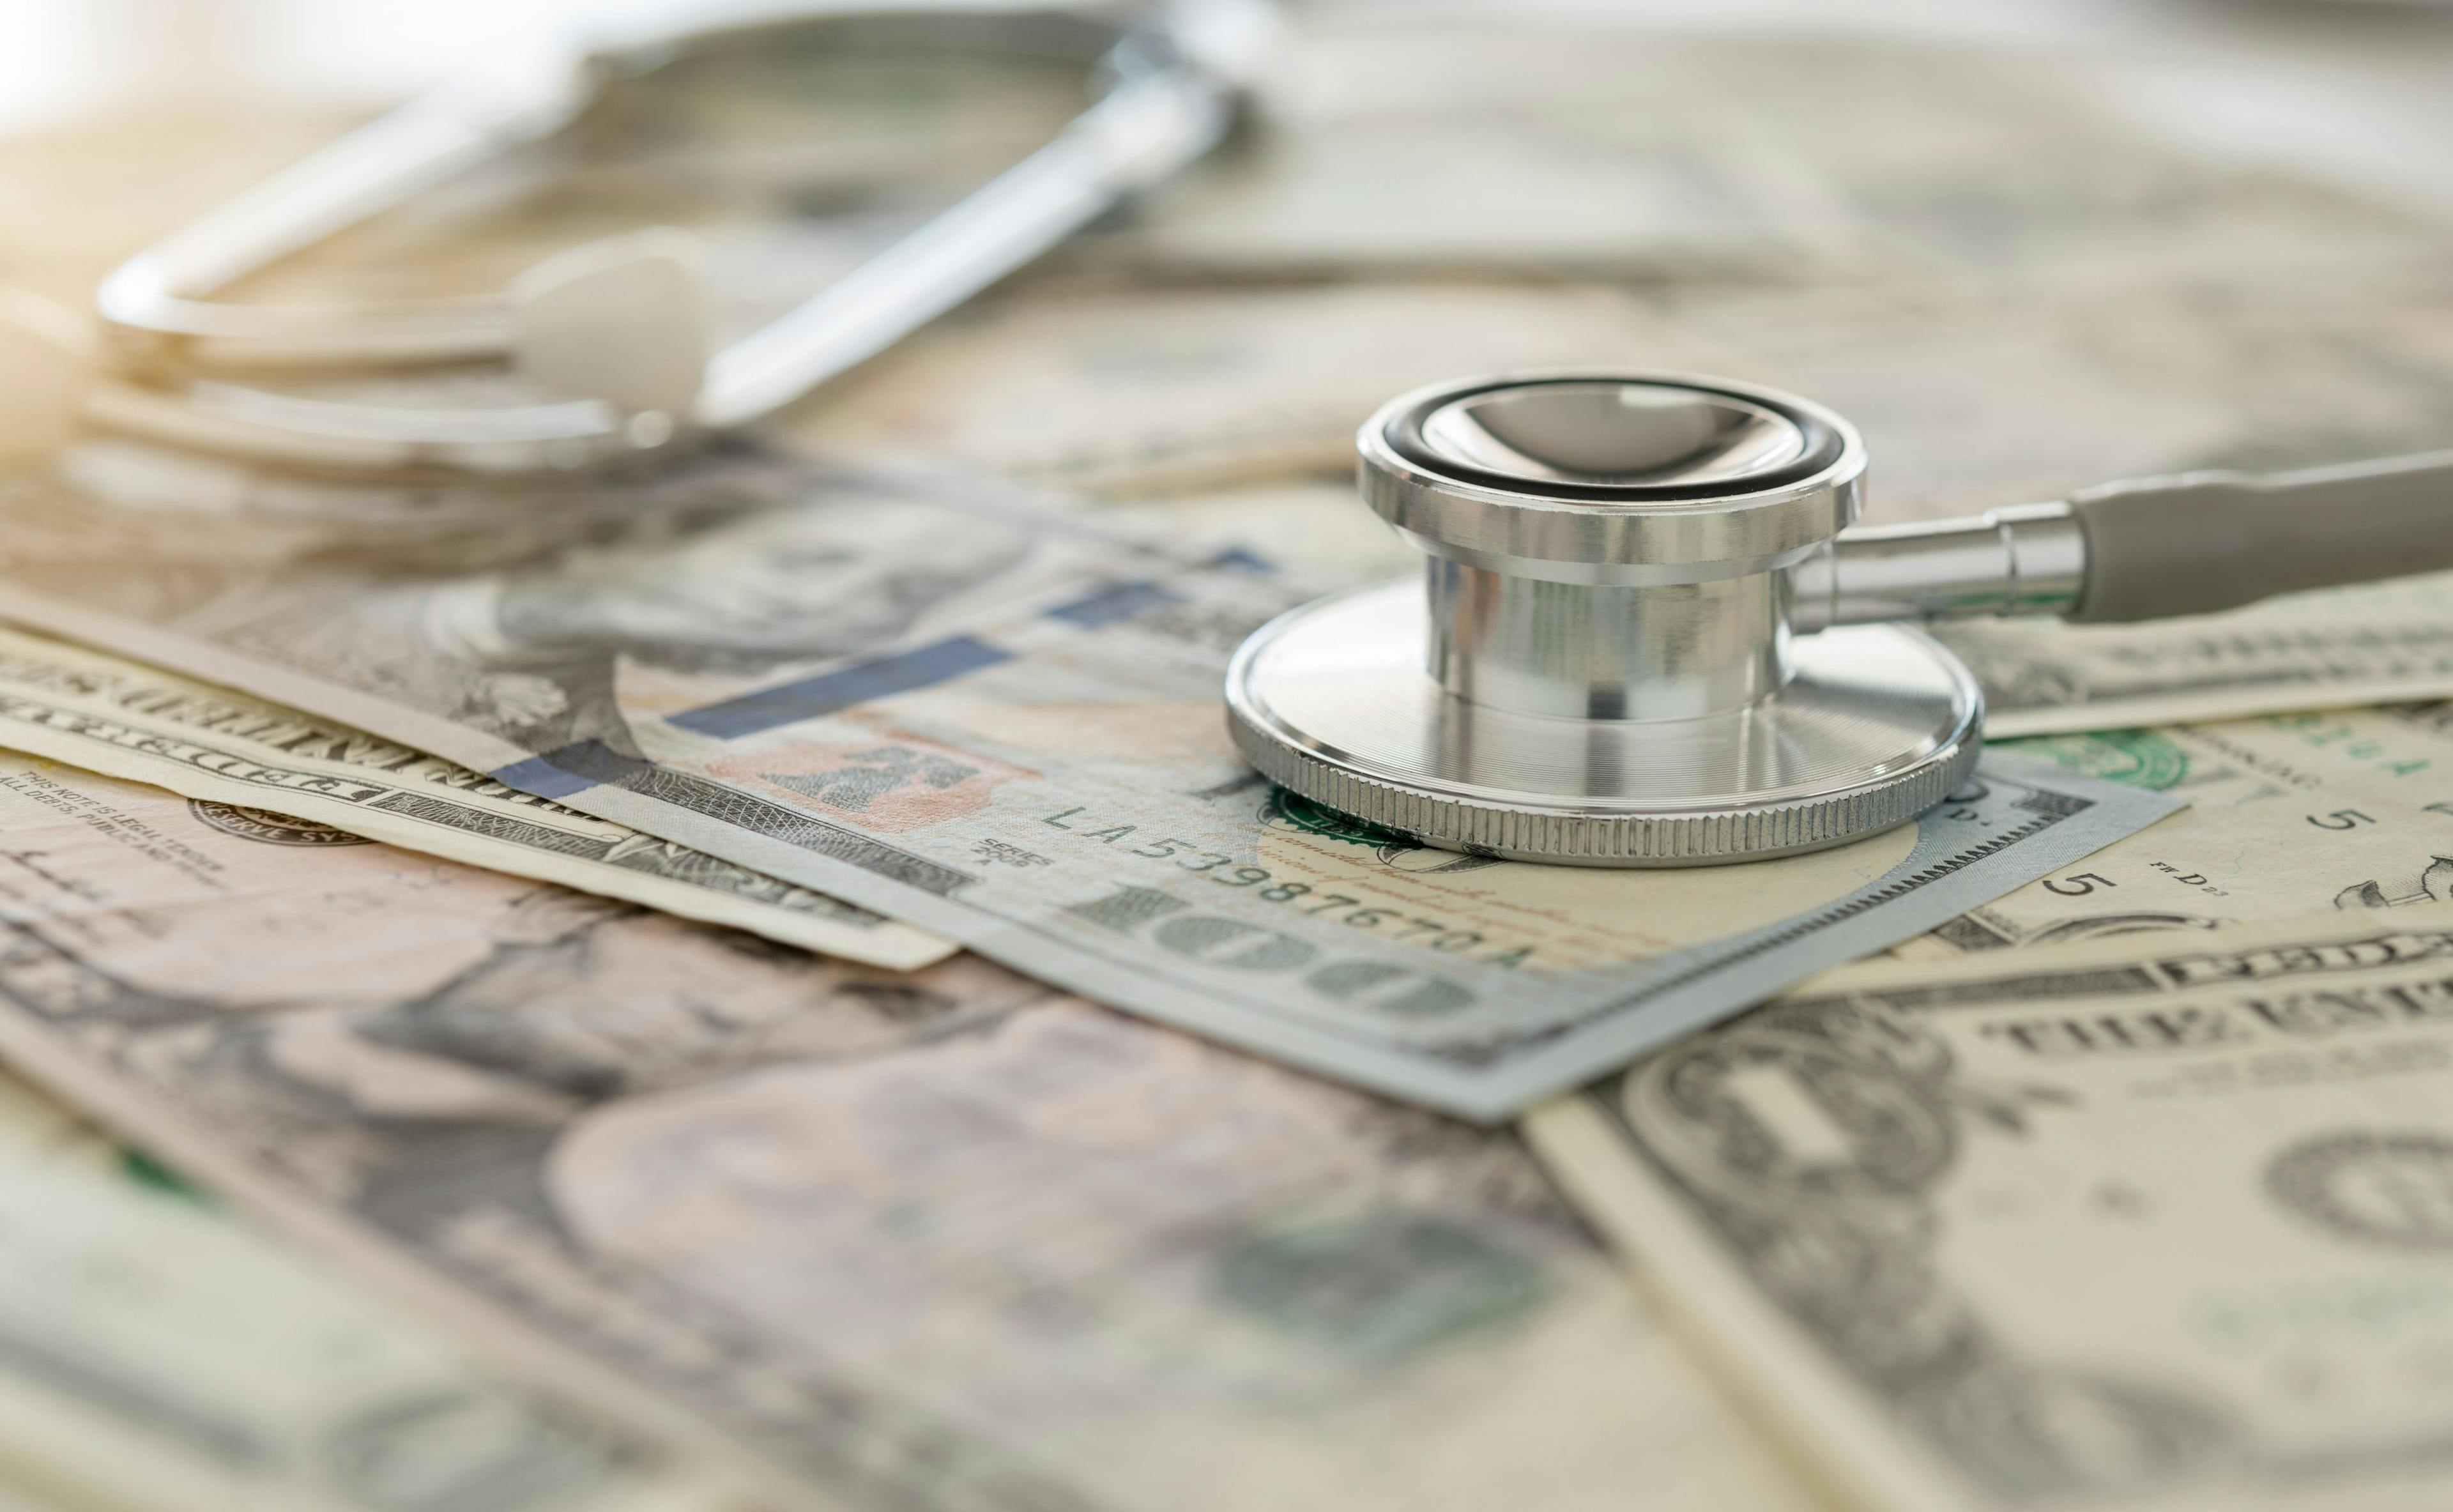 Could a Cash-Based System Help Eliminate Health Care Barriers?